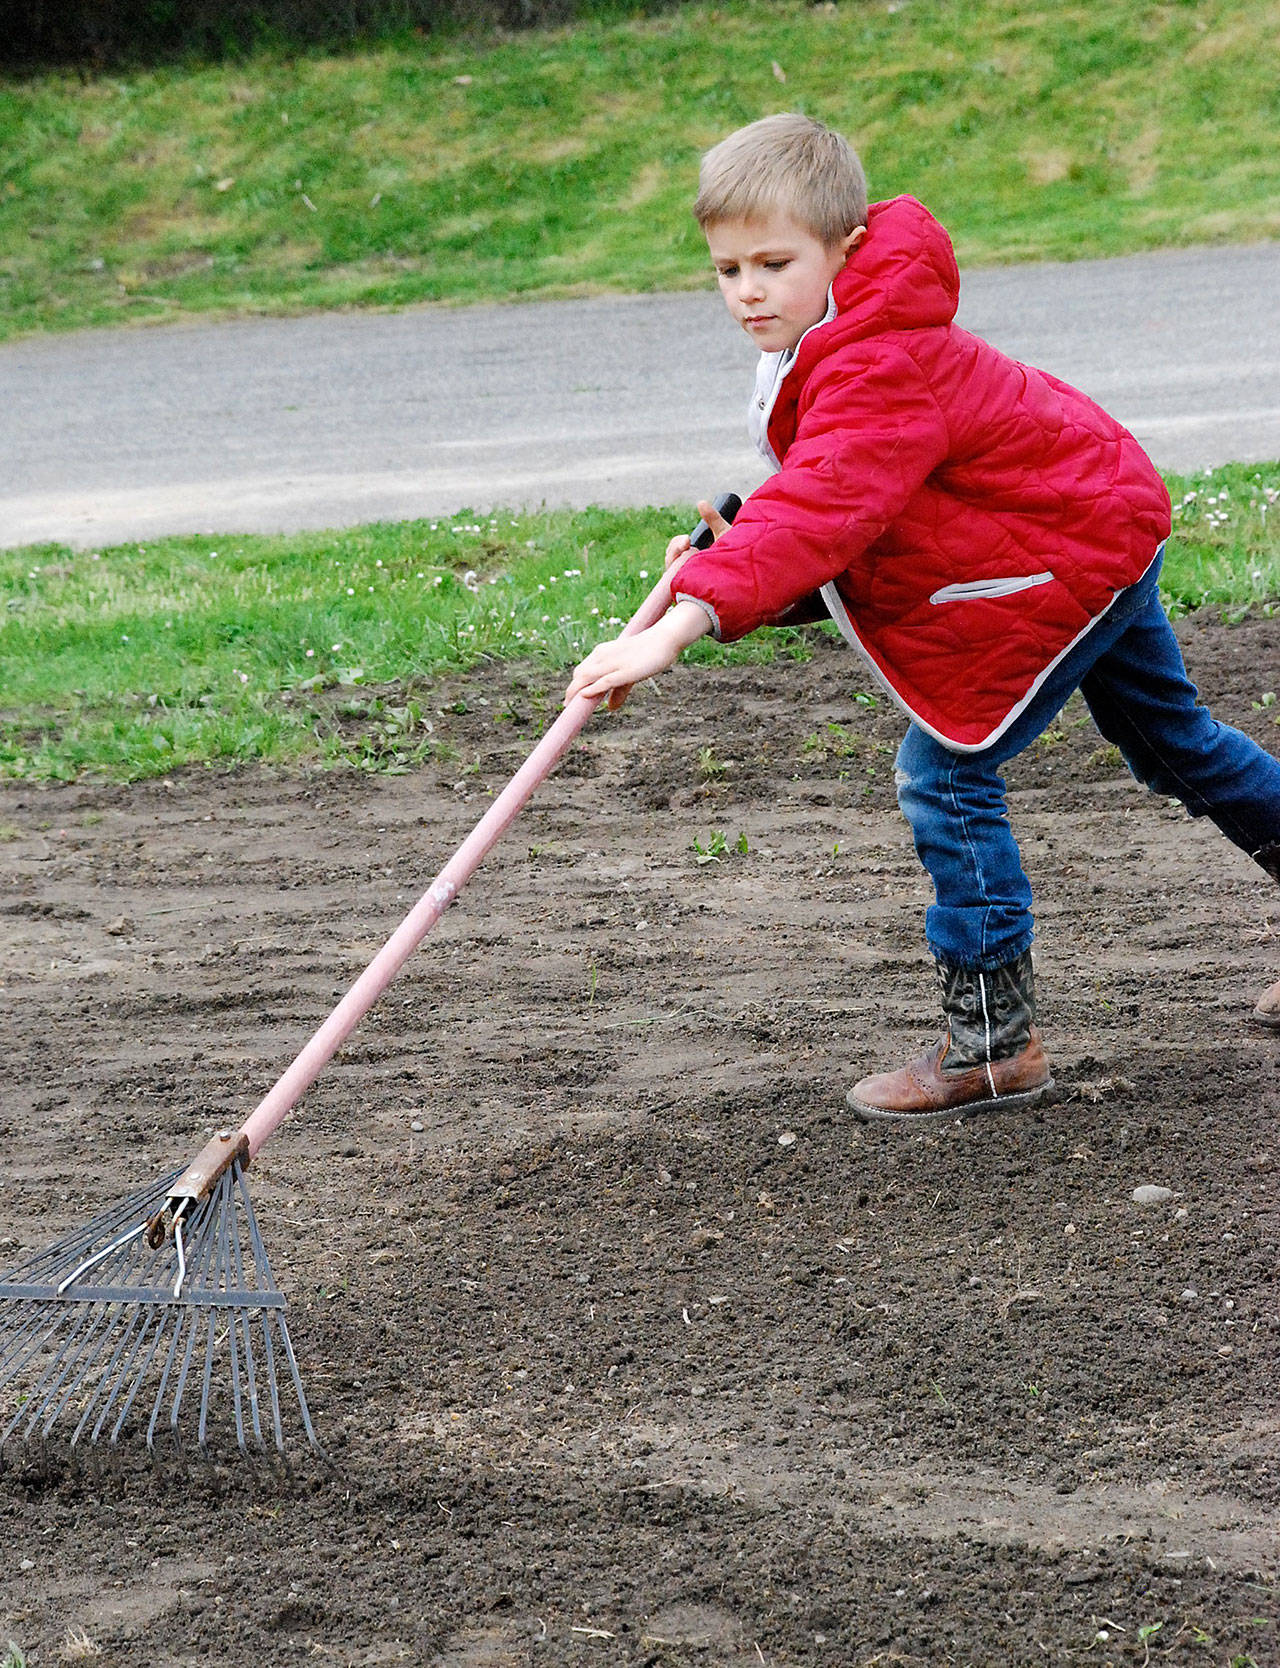 Benney Hyde, 7, rakes in filler topsoil on the playfield at Central Park during Port Orchard Community Service Day April 29.